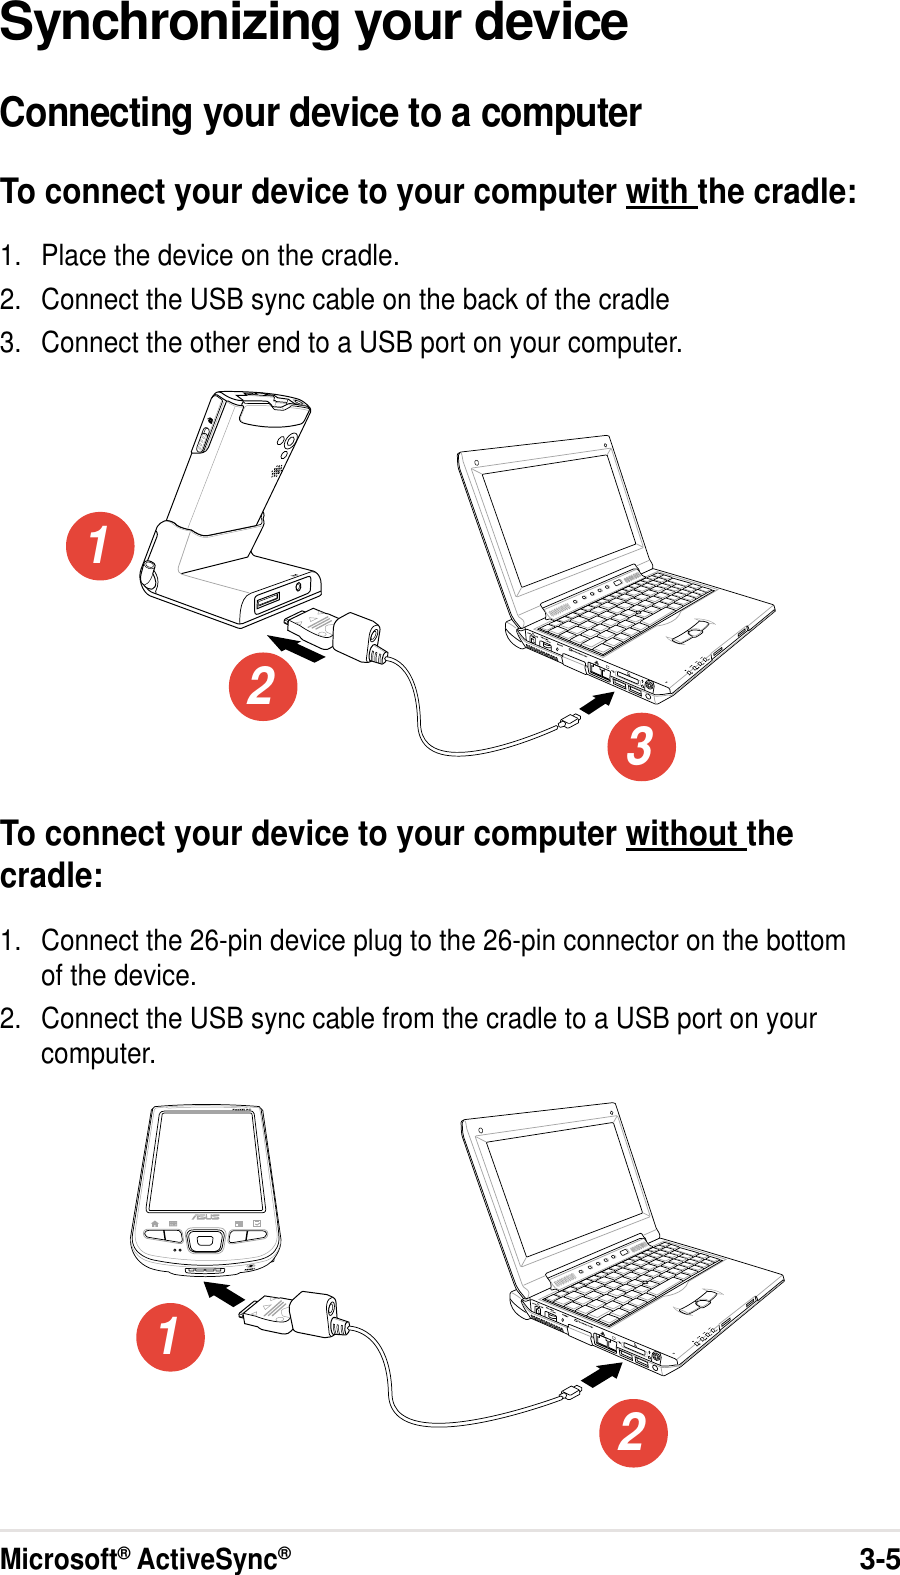 Microsoft® ActiveSync®3-5Synchronizing your deviceConnecting your device to a computerTo connect your device to your computer with the cradle:1. Place the device on the cradle.2. Connect the USB sync cable on the back of the cradle3. Connect the other end to a USB port on your computer.To connect your device to your computer without thecradle:1. Connect the 26-pin device plug to the 26-pin connector on the bottomof the device.2. Connect the USB sync cable from the cradle to a USB port on yourcomputer.12312